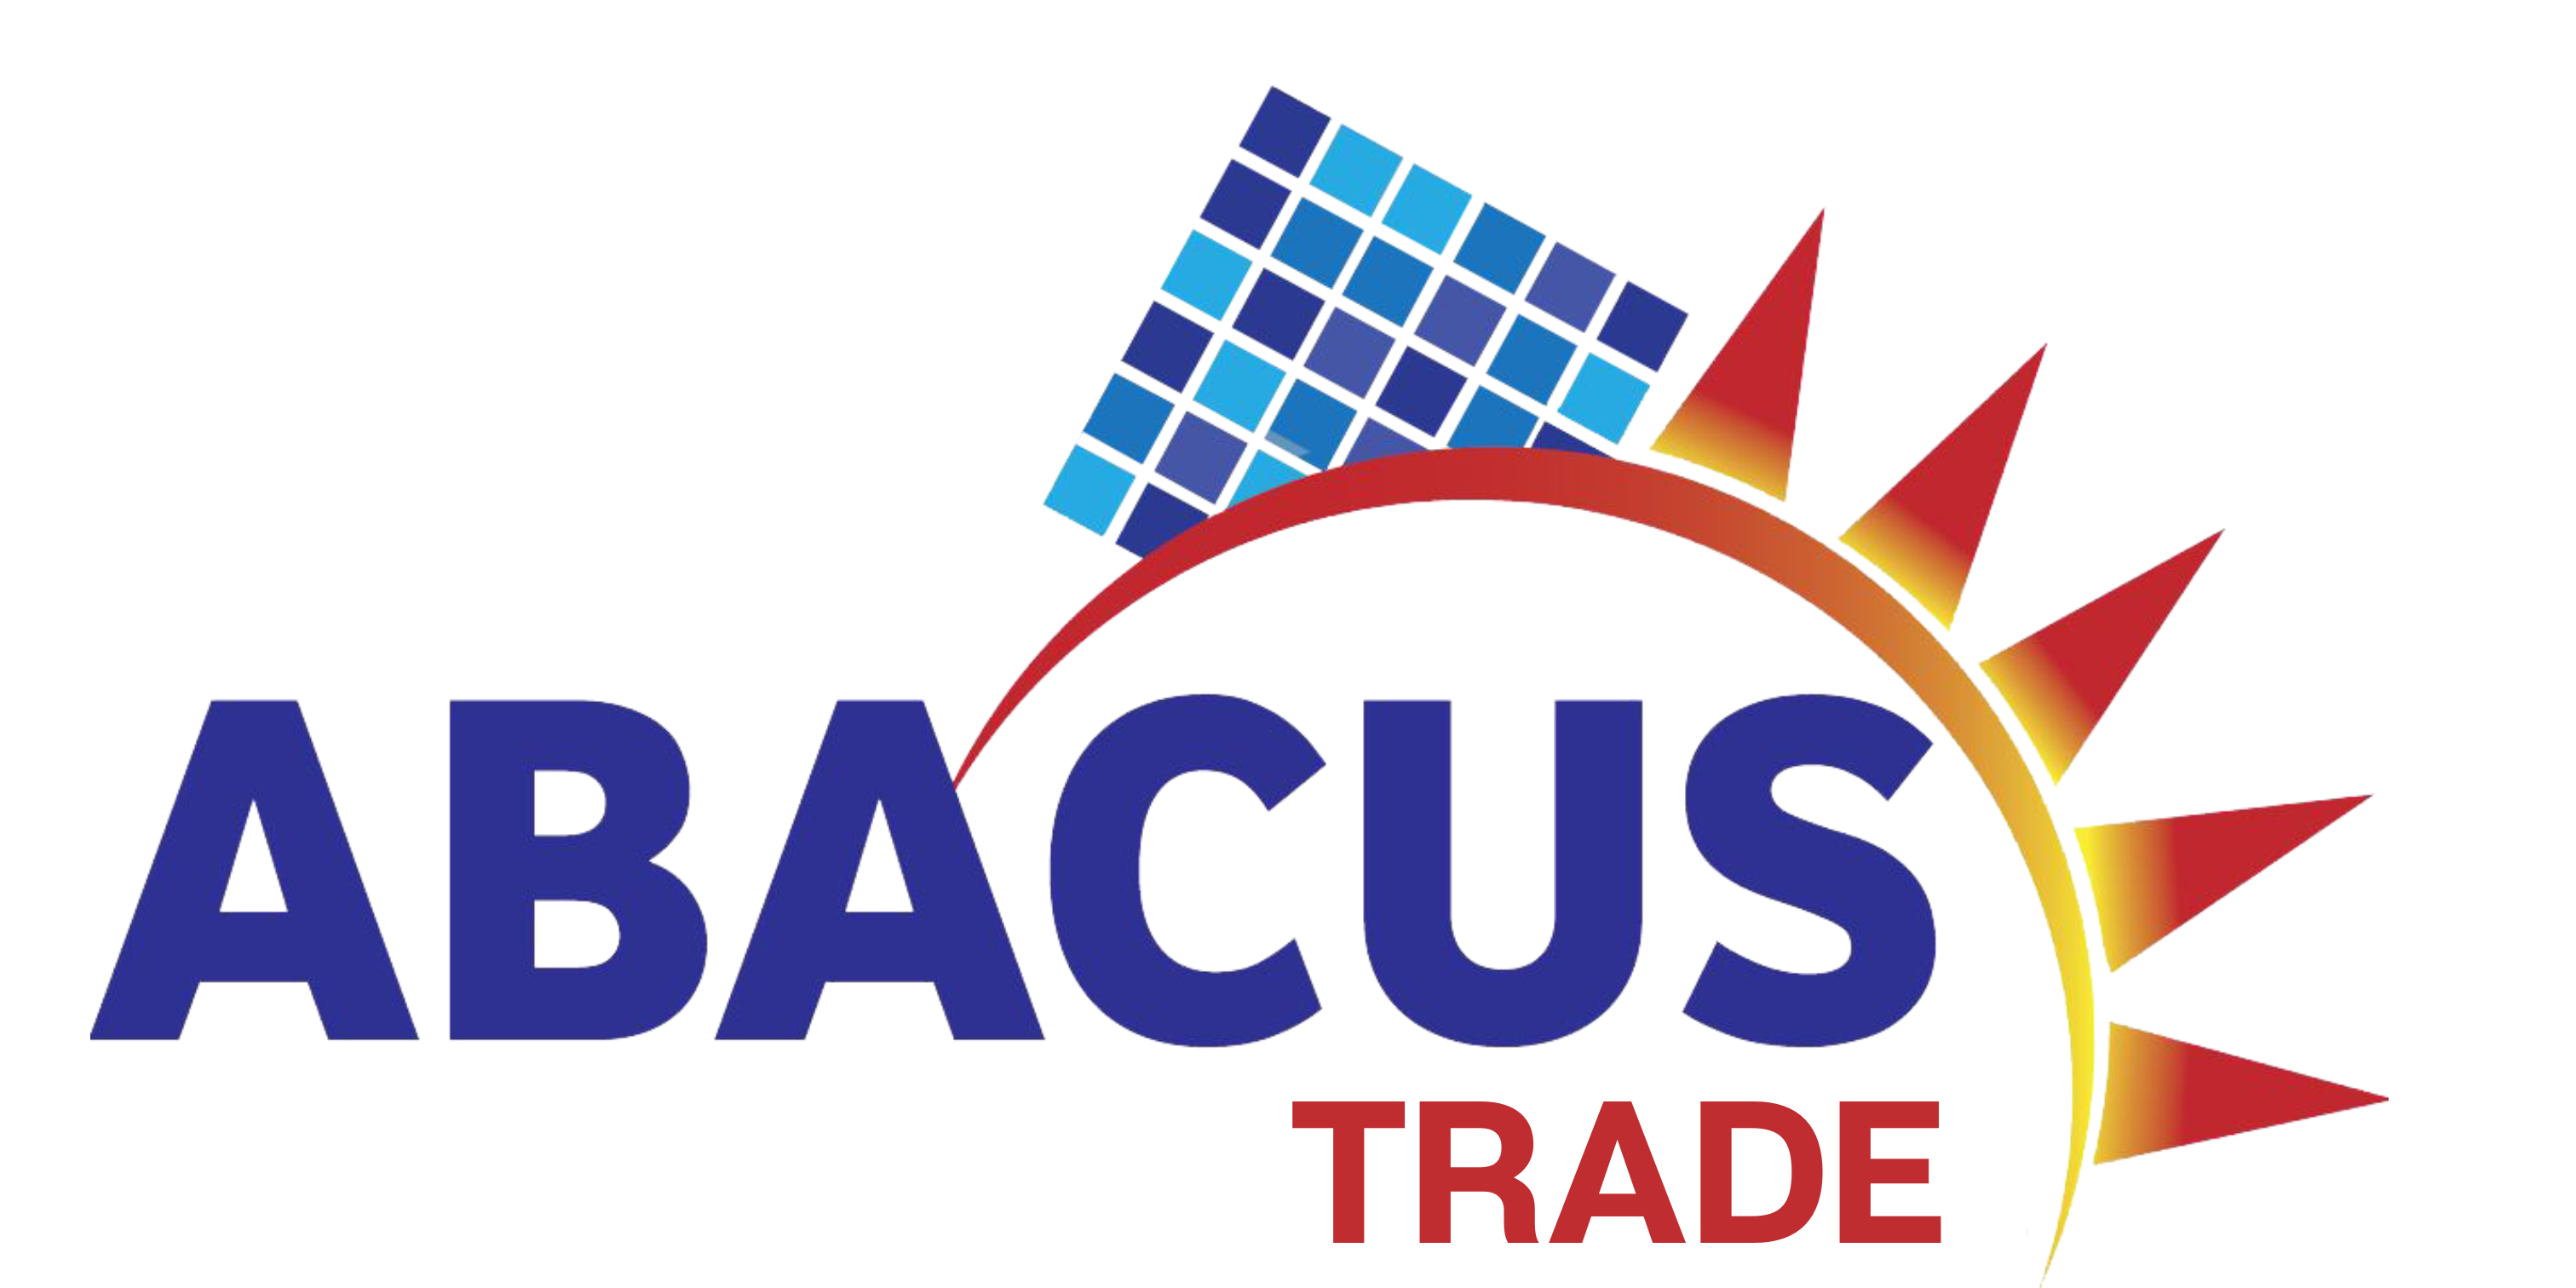 Abacus Trade